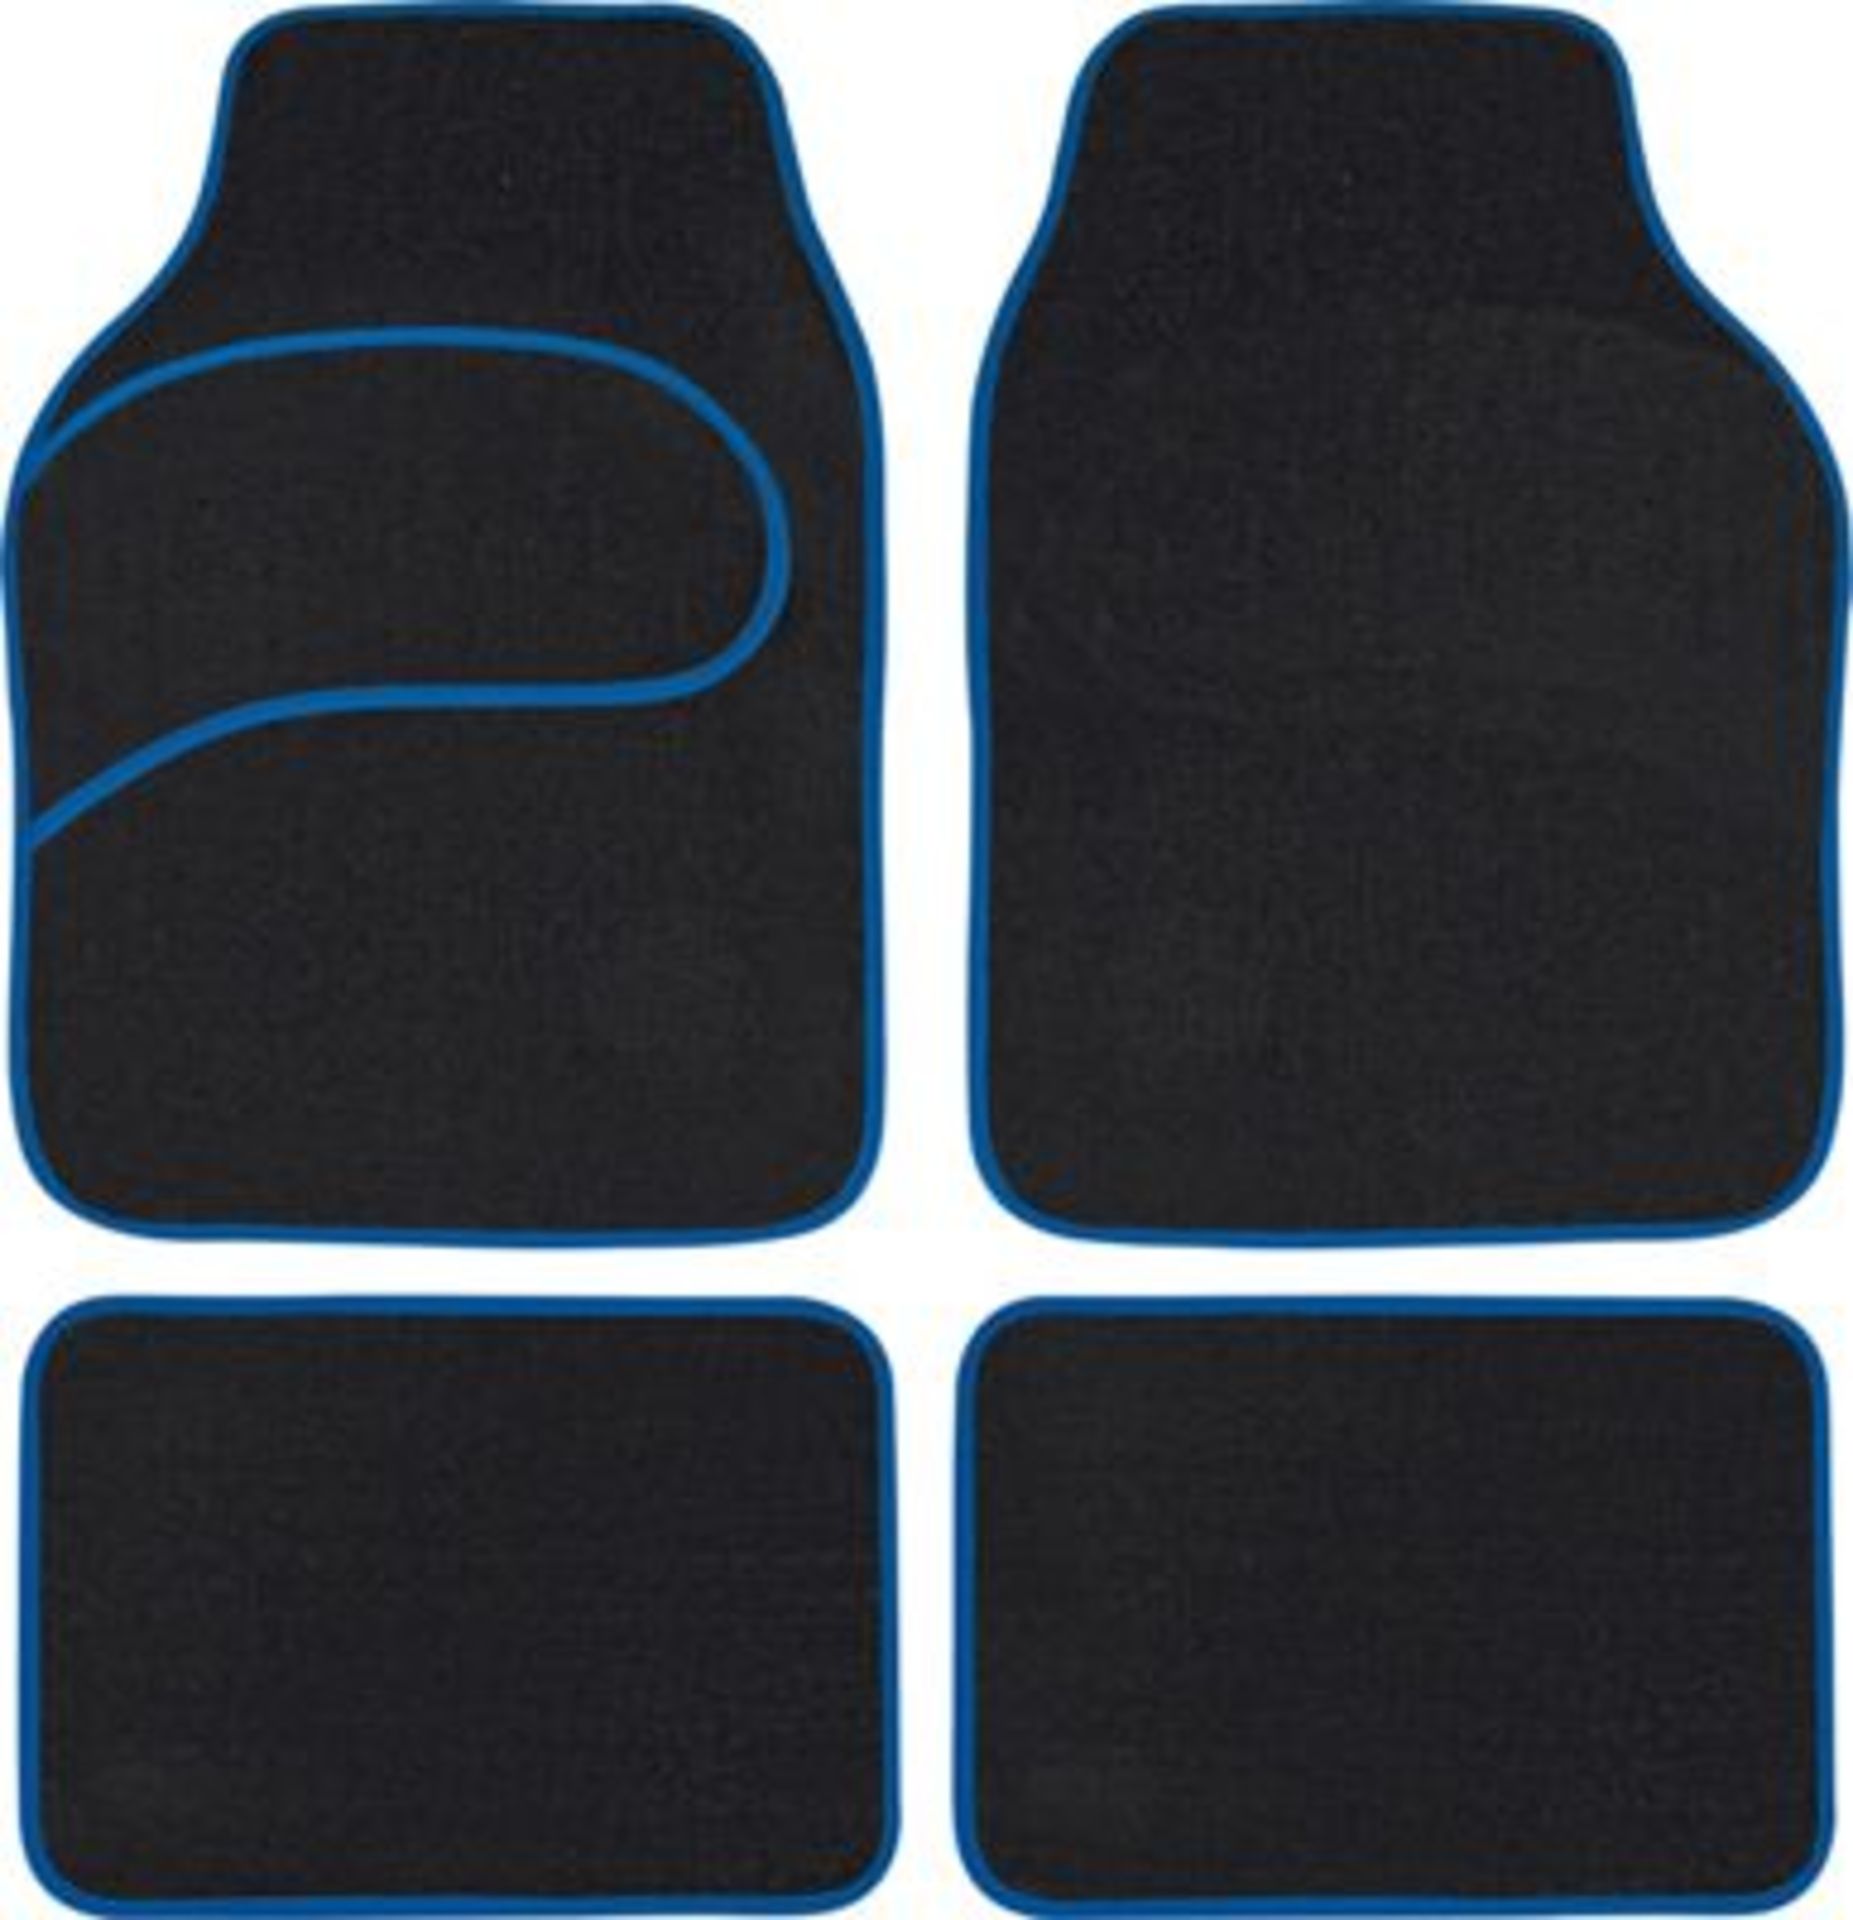 V *TRADE QTY* Brand New Set of 4 Universal Fit Car Mats ISP £12.99 (Homebase) Item does not have